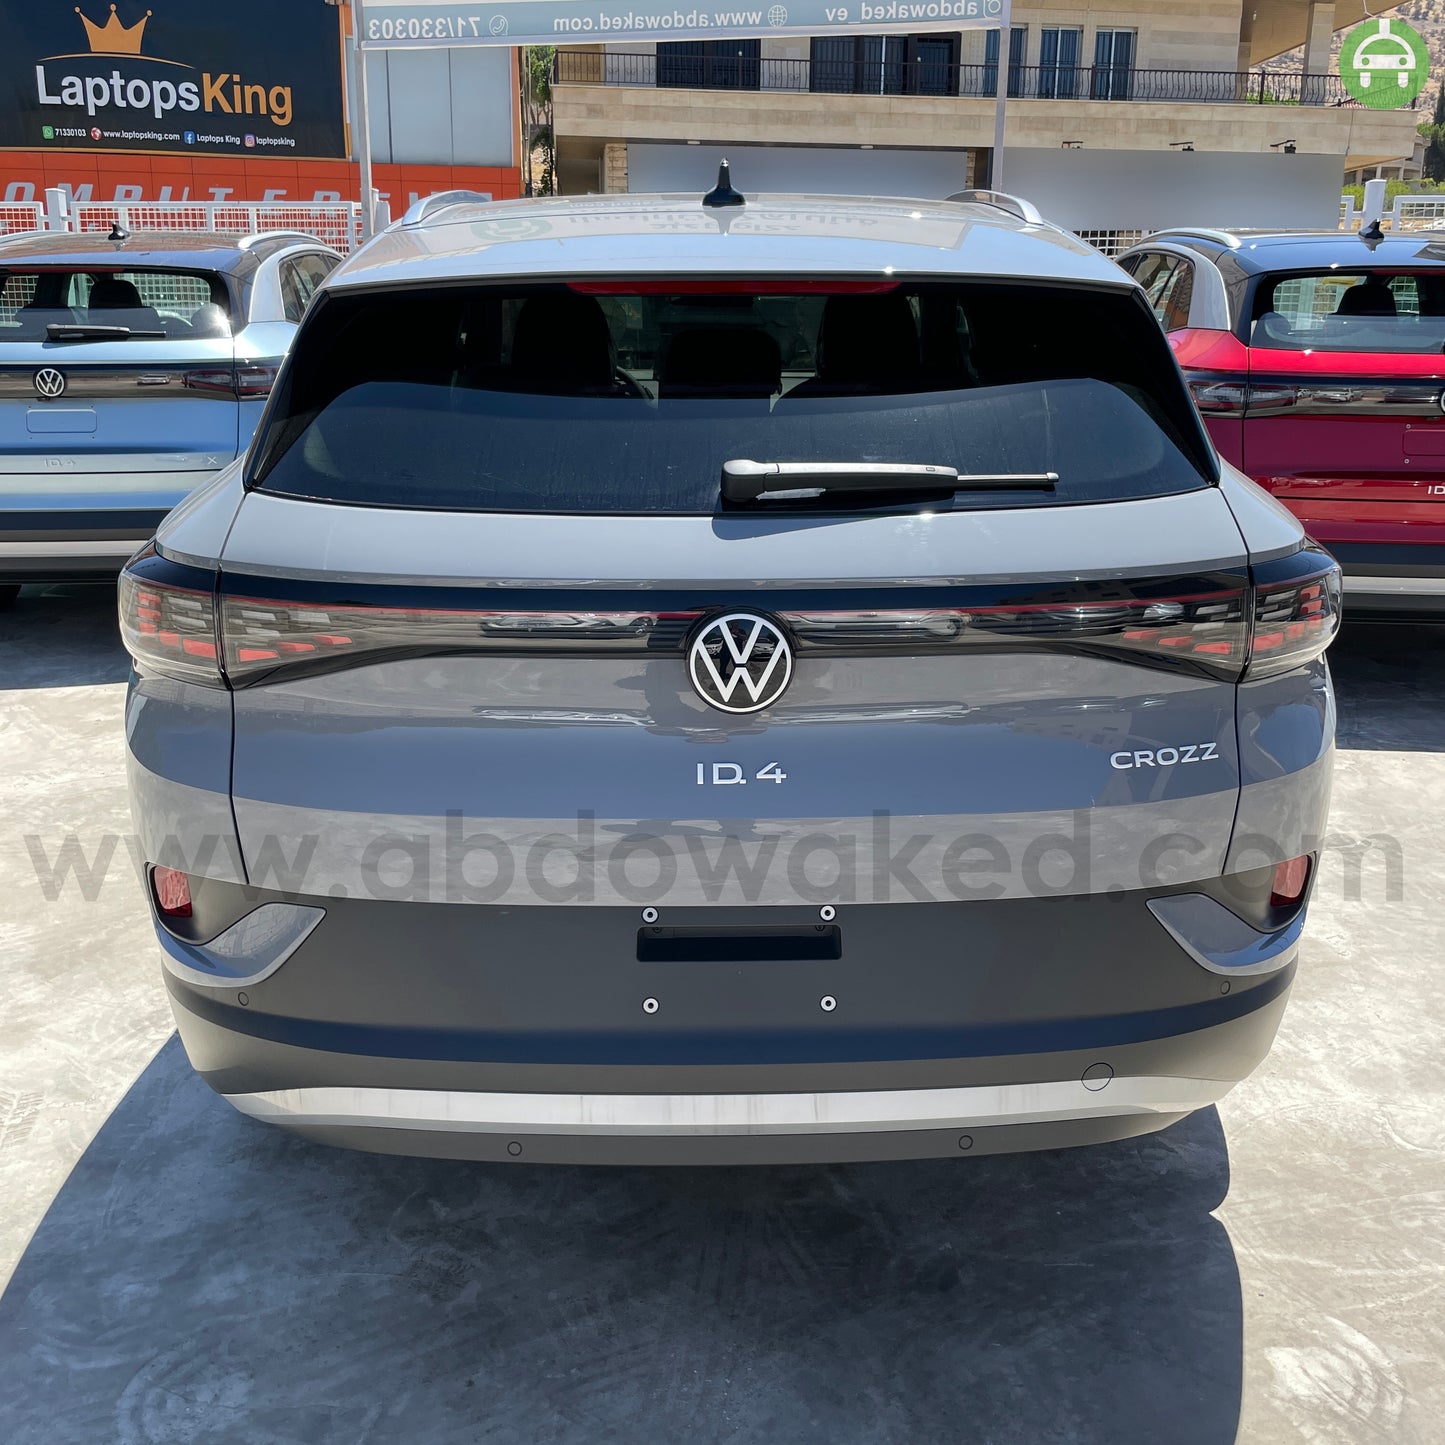 VW ID4 Crozz Pure+ 2022 Nardo Grey Color 550km Range/Charge Fully Electric Car (New - 0KM)